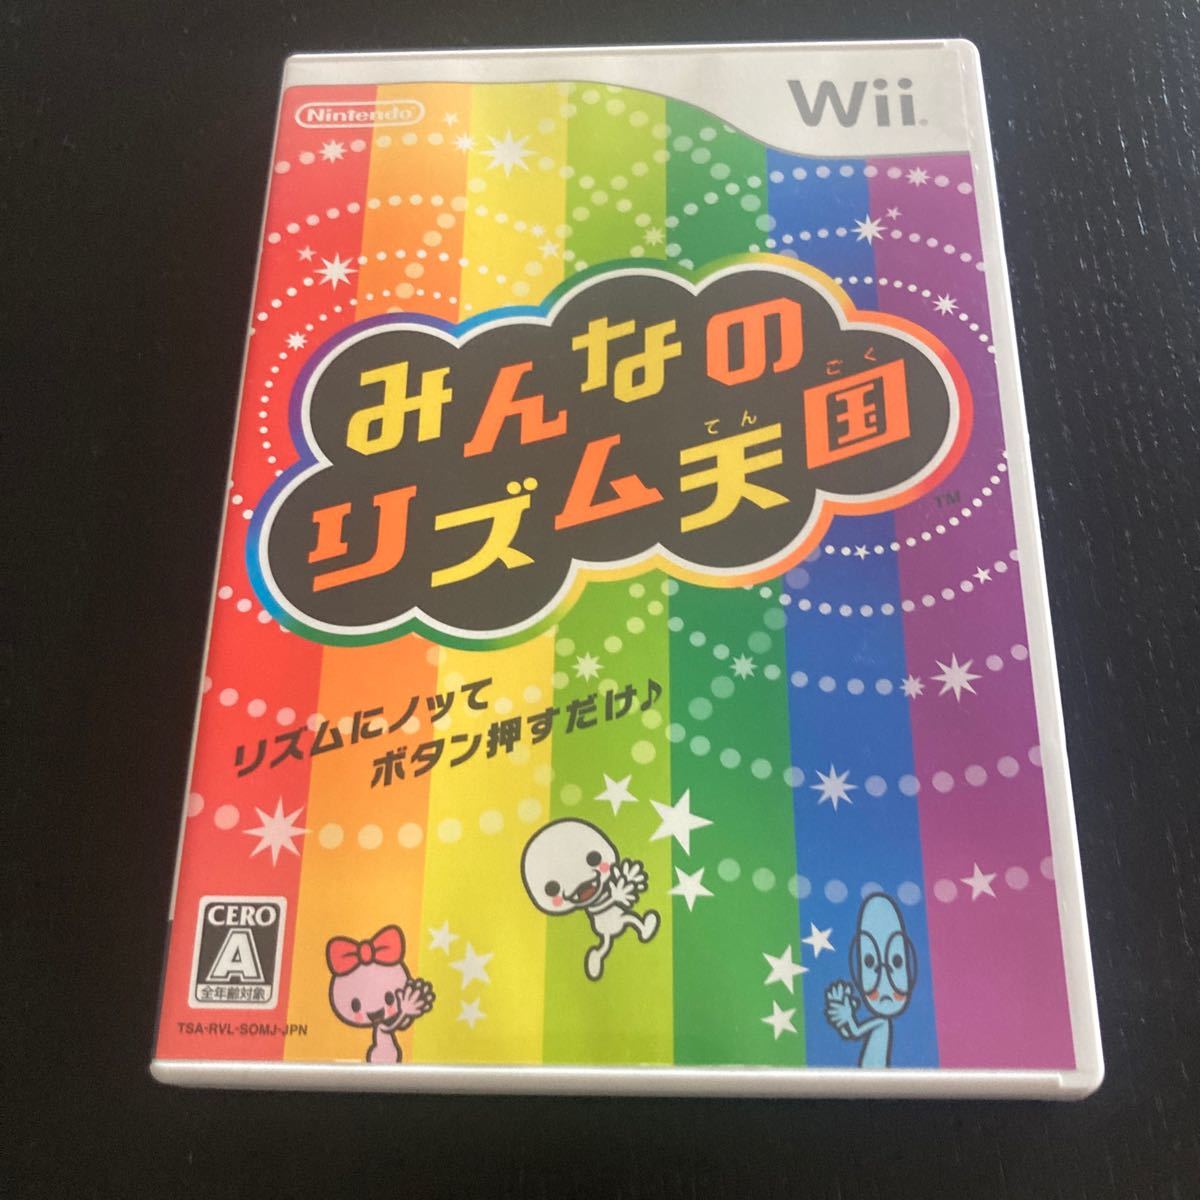 Wii Wiiソフト みんなのリズム天国　美品　即日発送